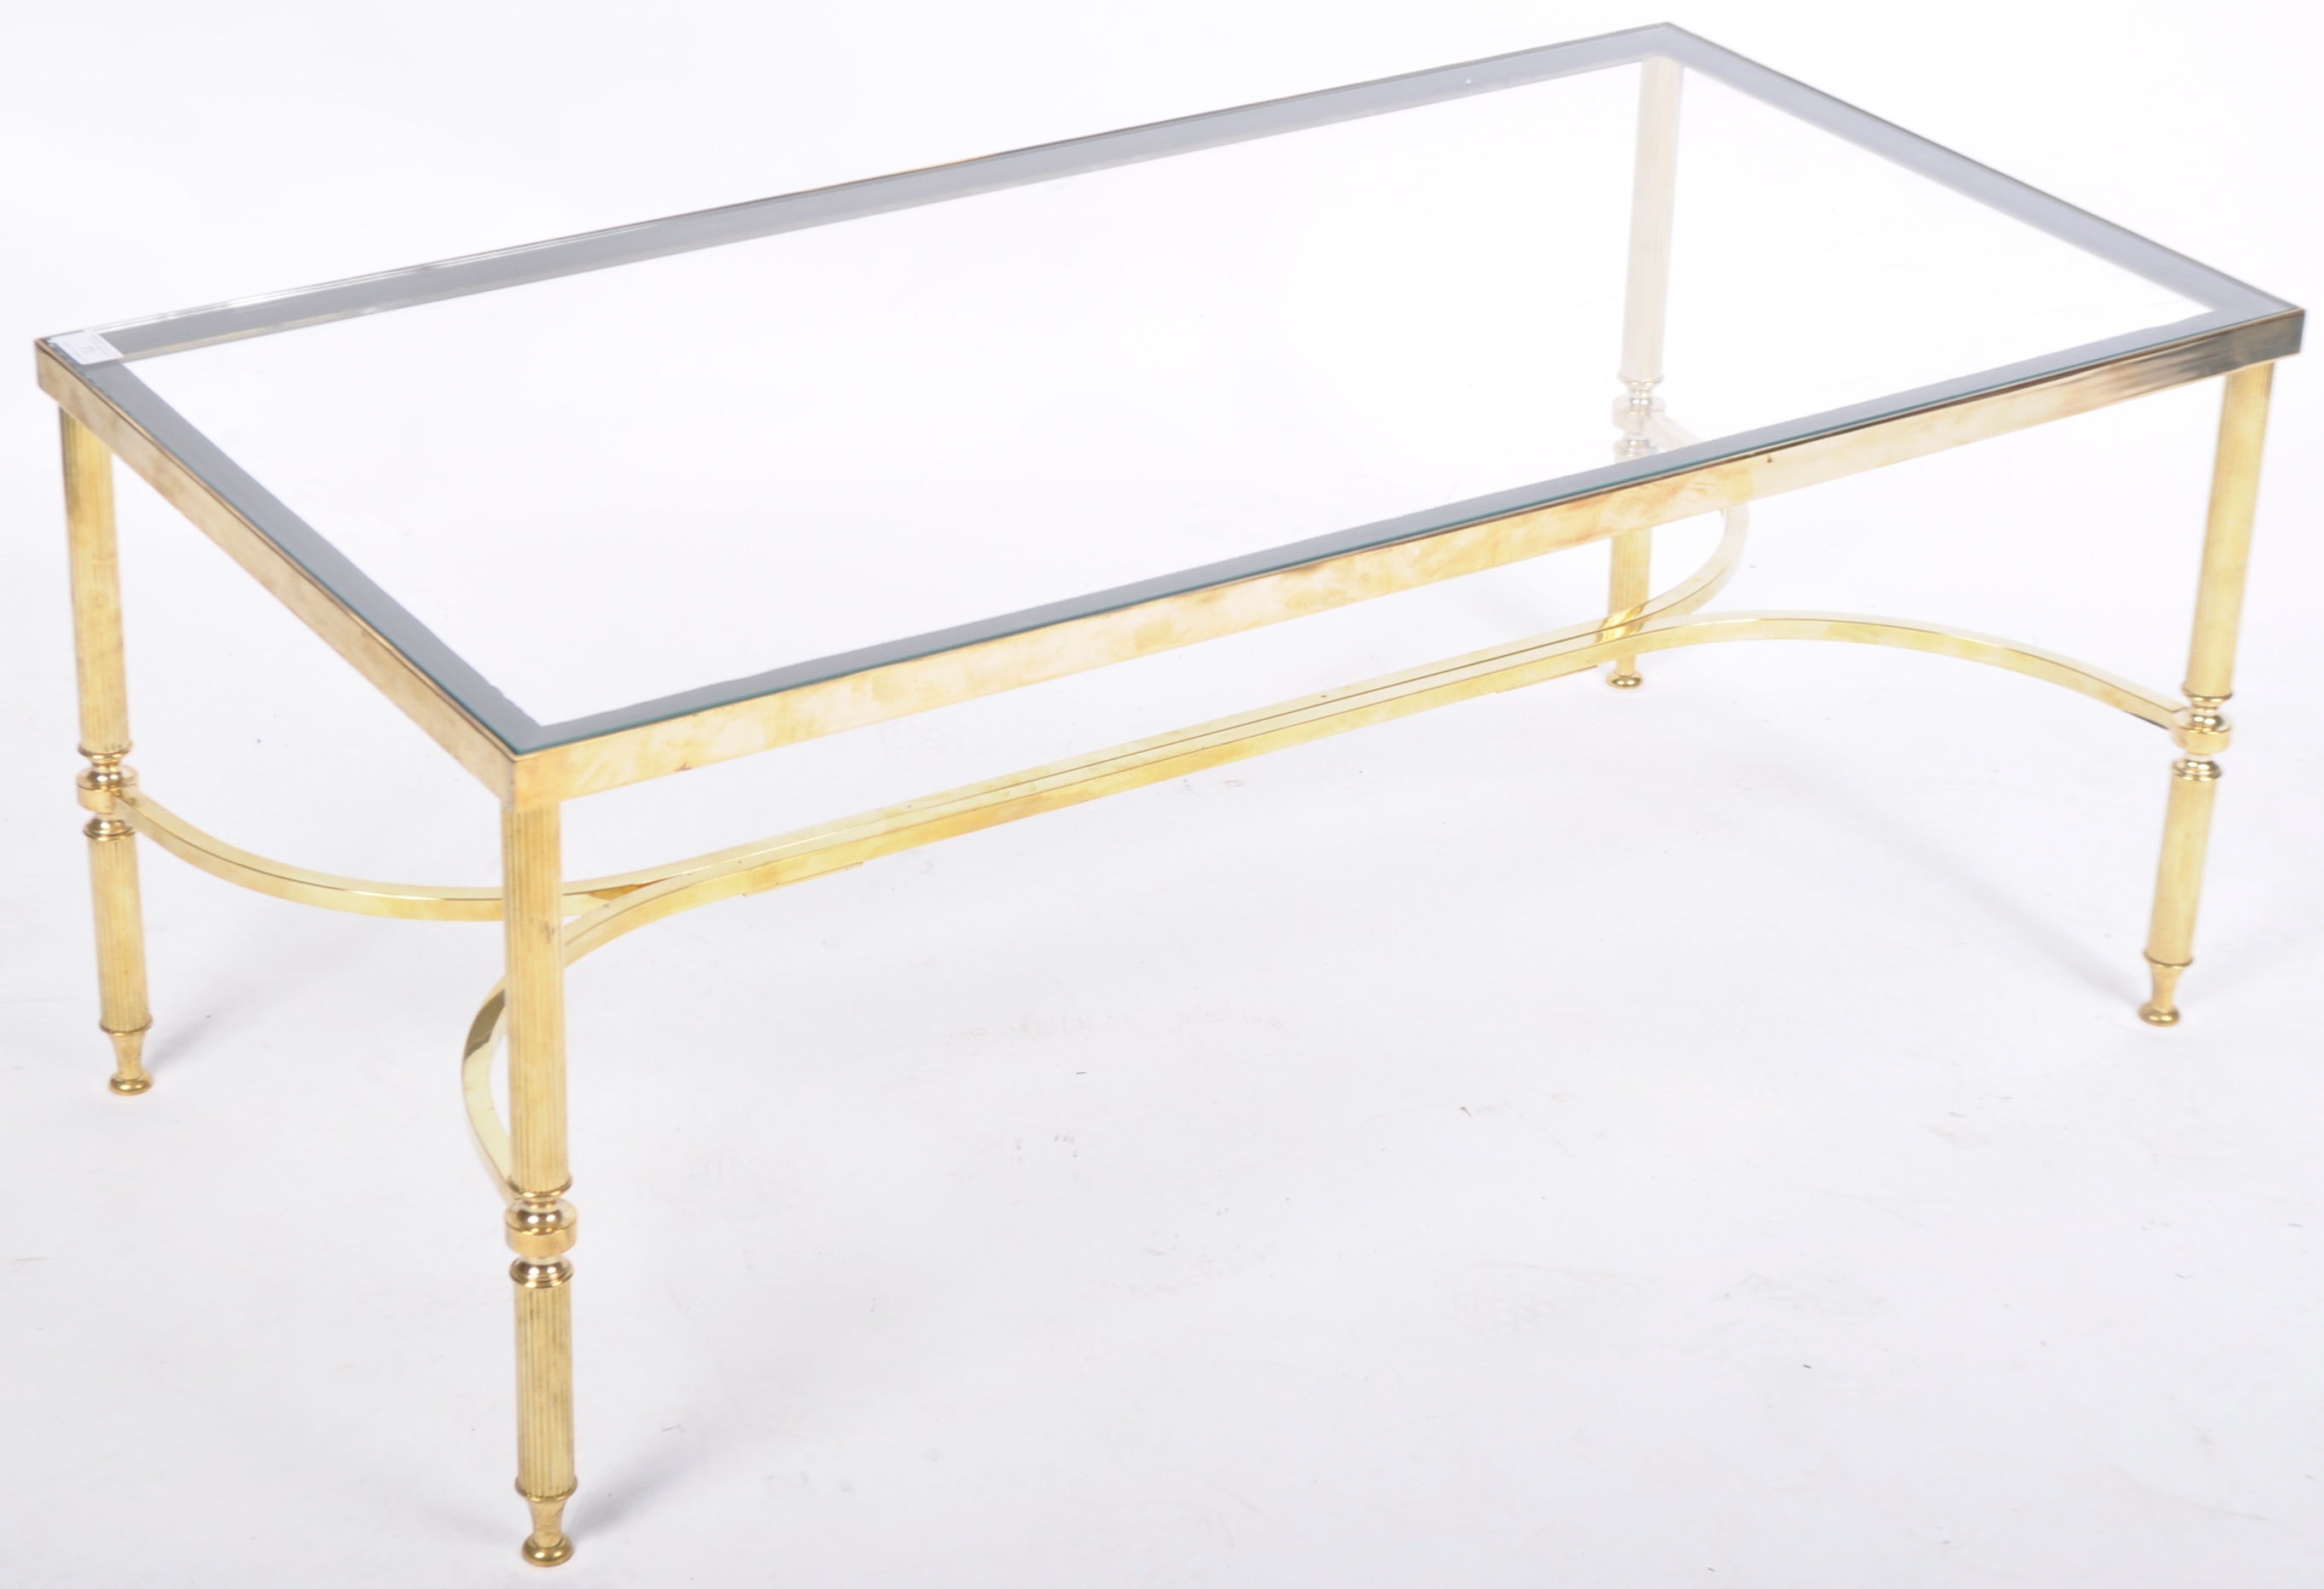 HOLLYWOOD REGENCY BRASS FRAMED COFFEE TABLE WITH GLASS TOP - Image 2 of 5